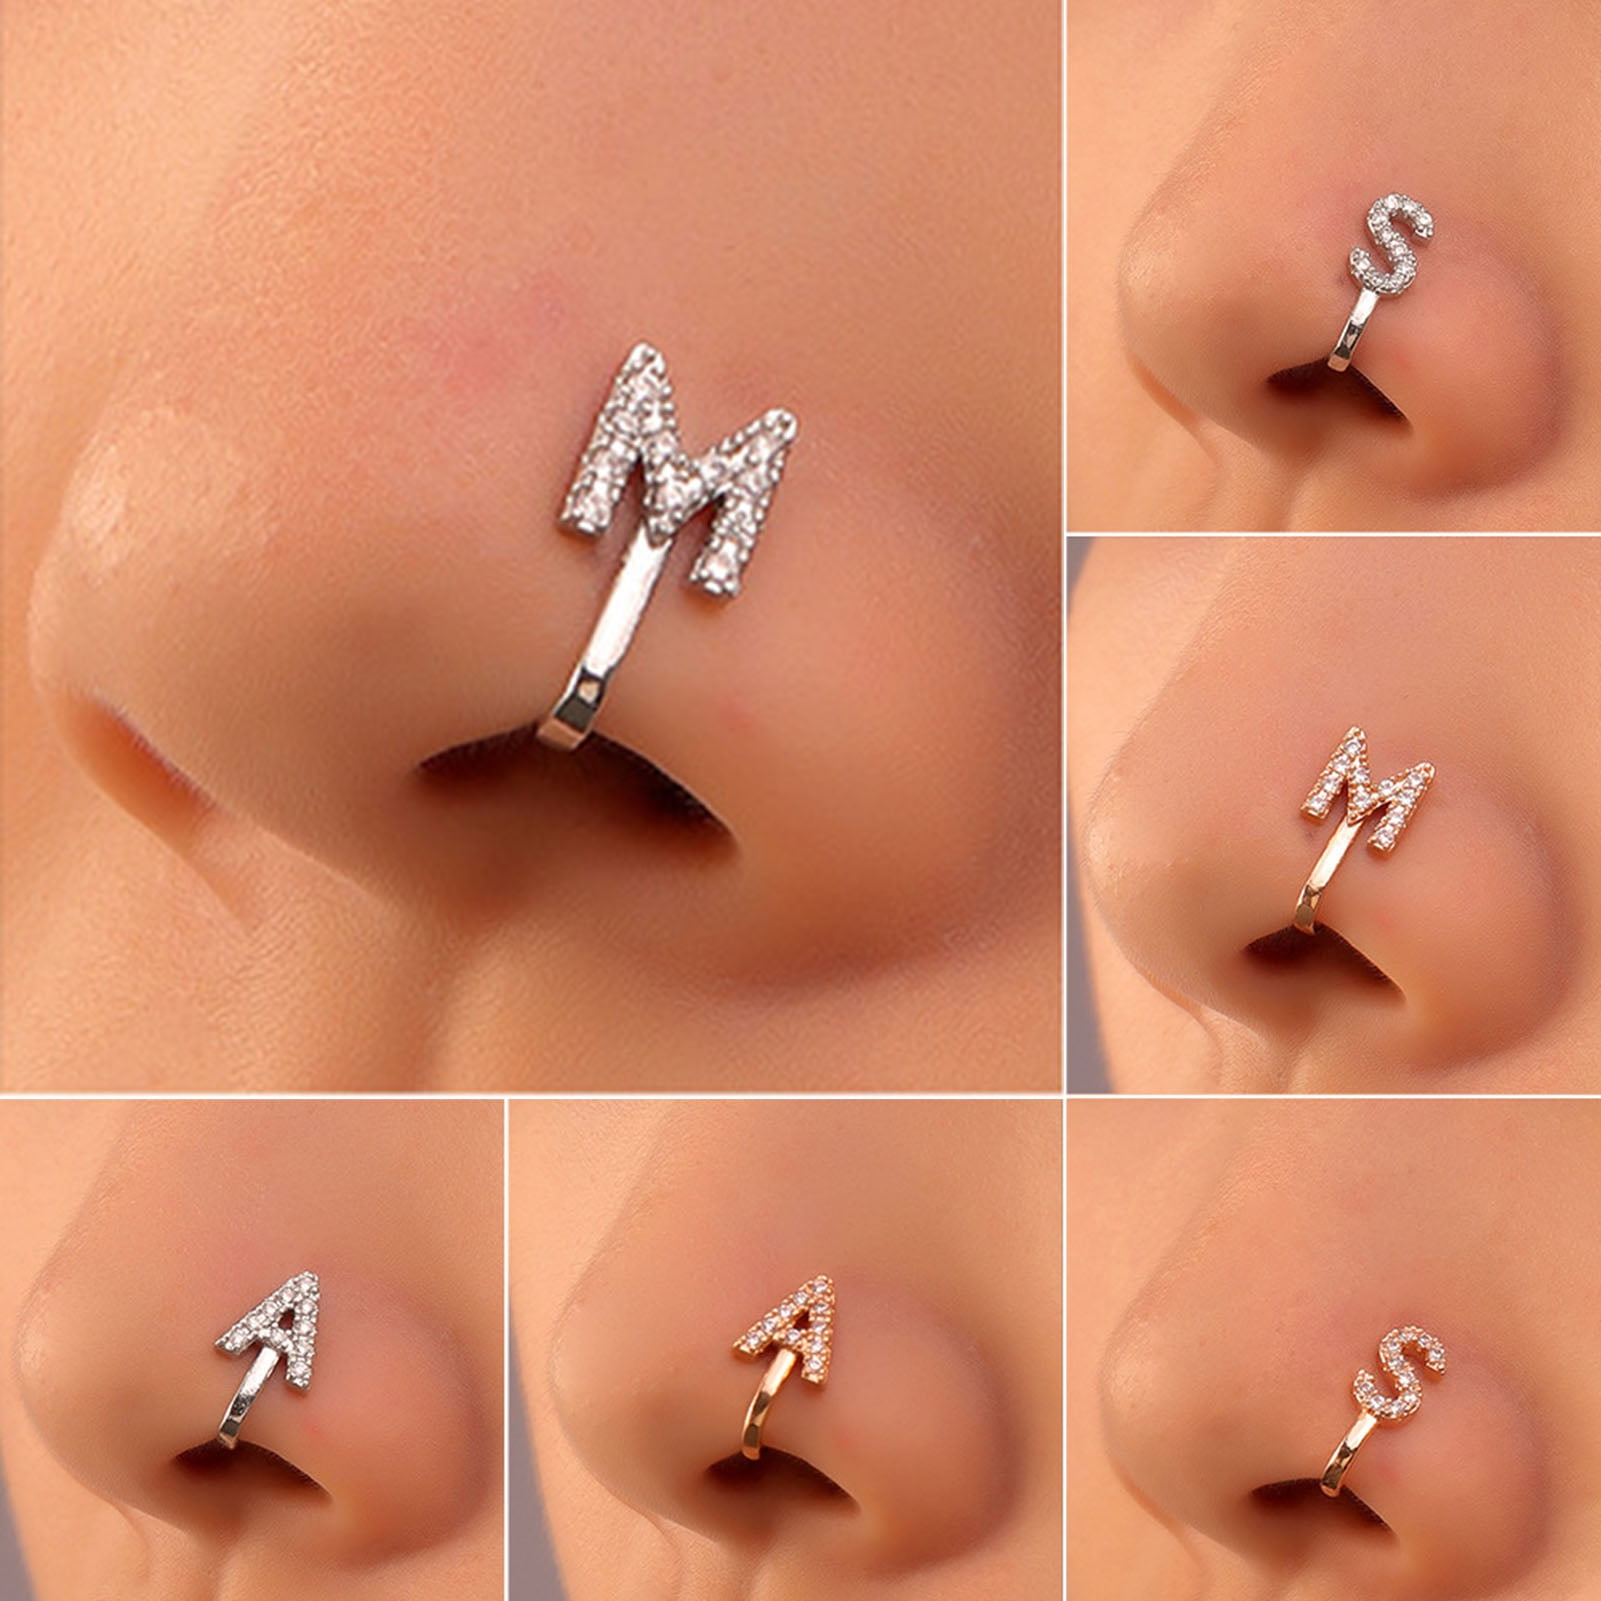 Nose rings: 9 most common types of nose rings, studs and chains